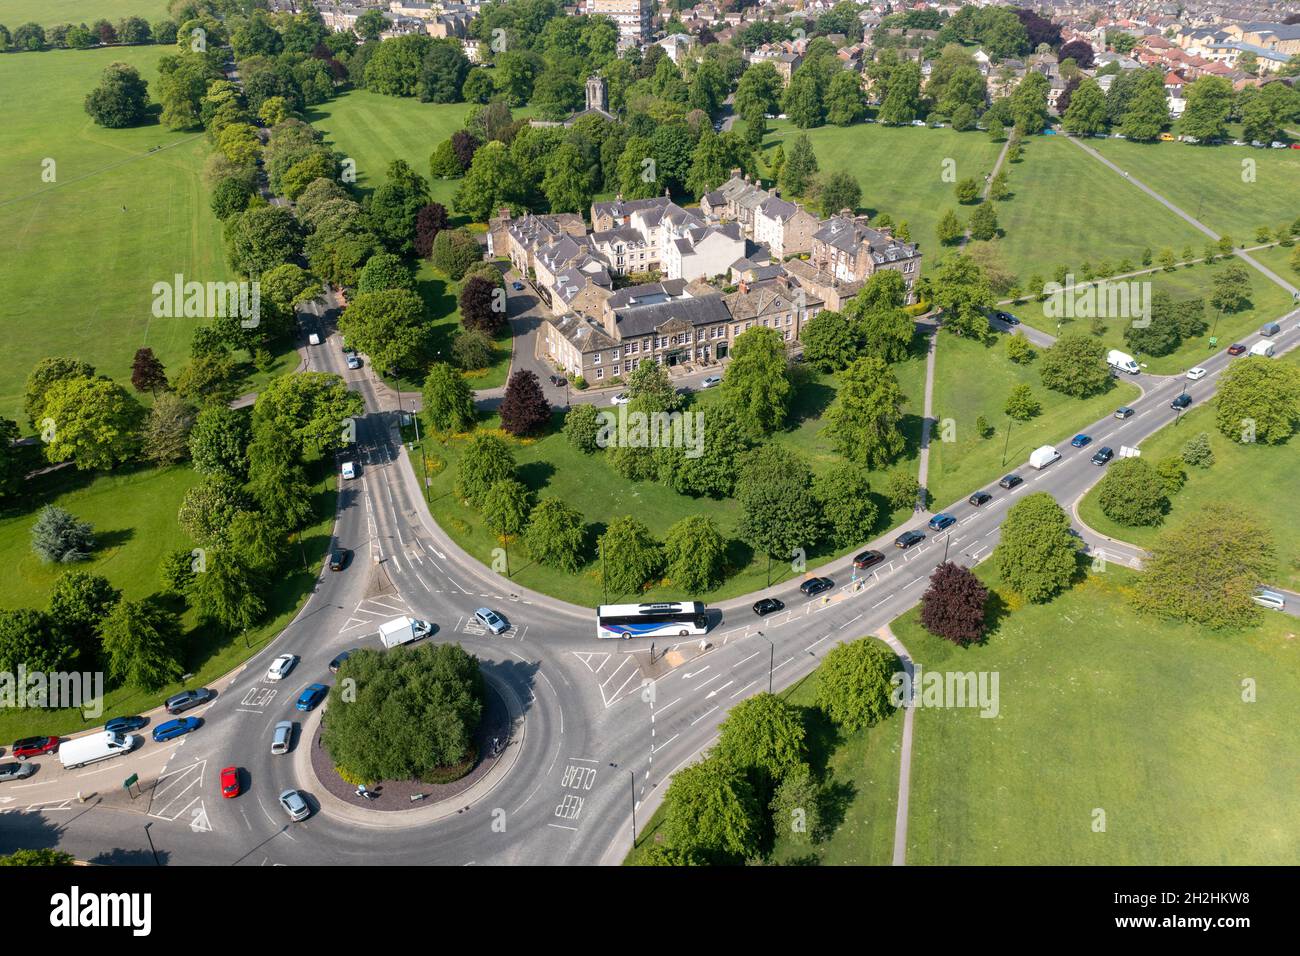 Aerial photo of the beautiful historical town of Harrogate in the UK showing the residential housing estate on the large roundabout with fields at eit Stock Photo